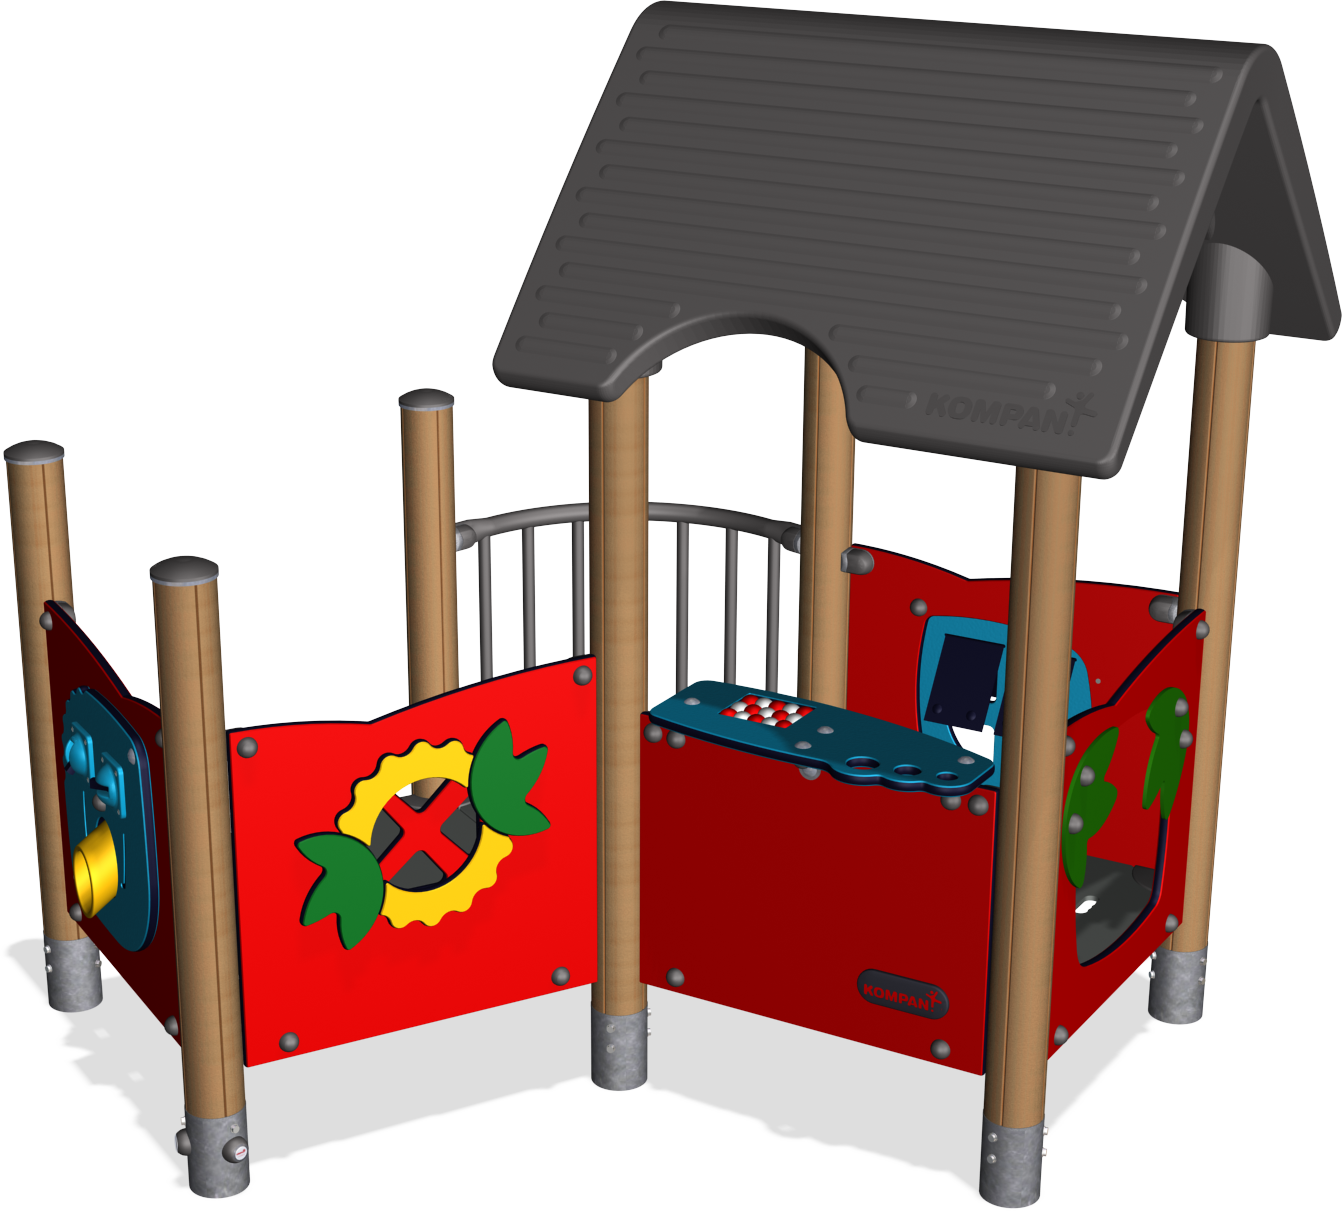 PLAYHOUSE WITH BALCONY, WOOD POSTS